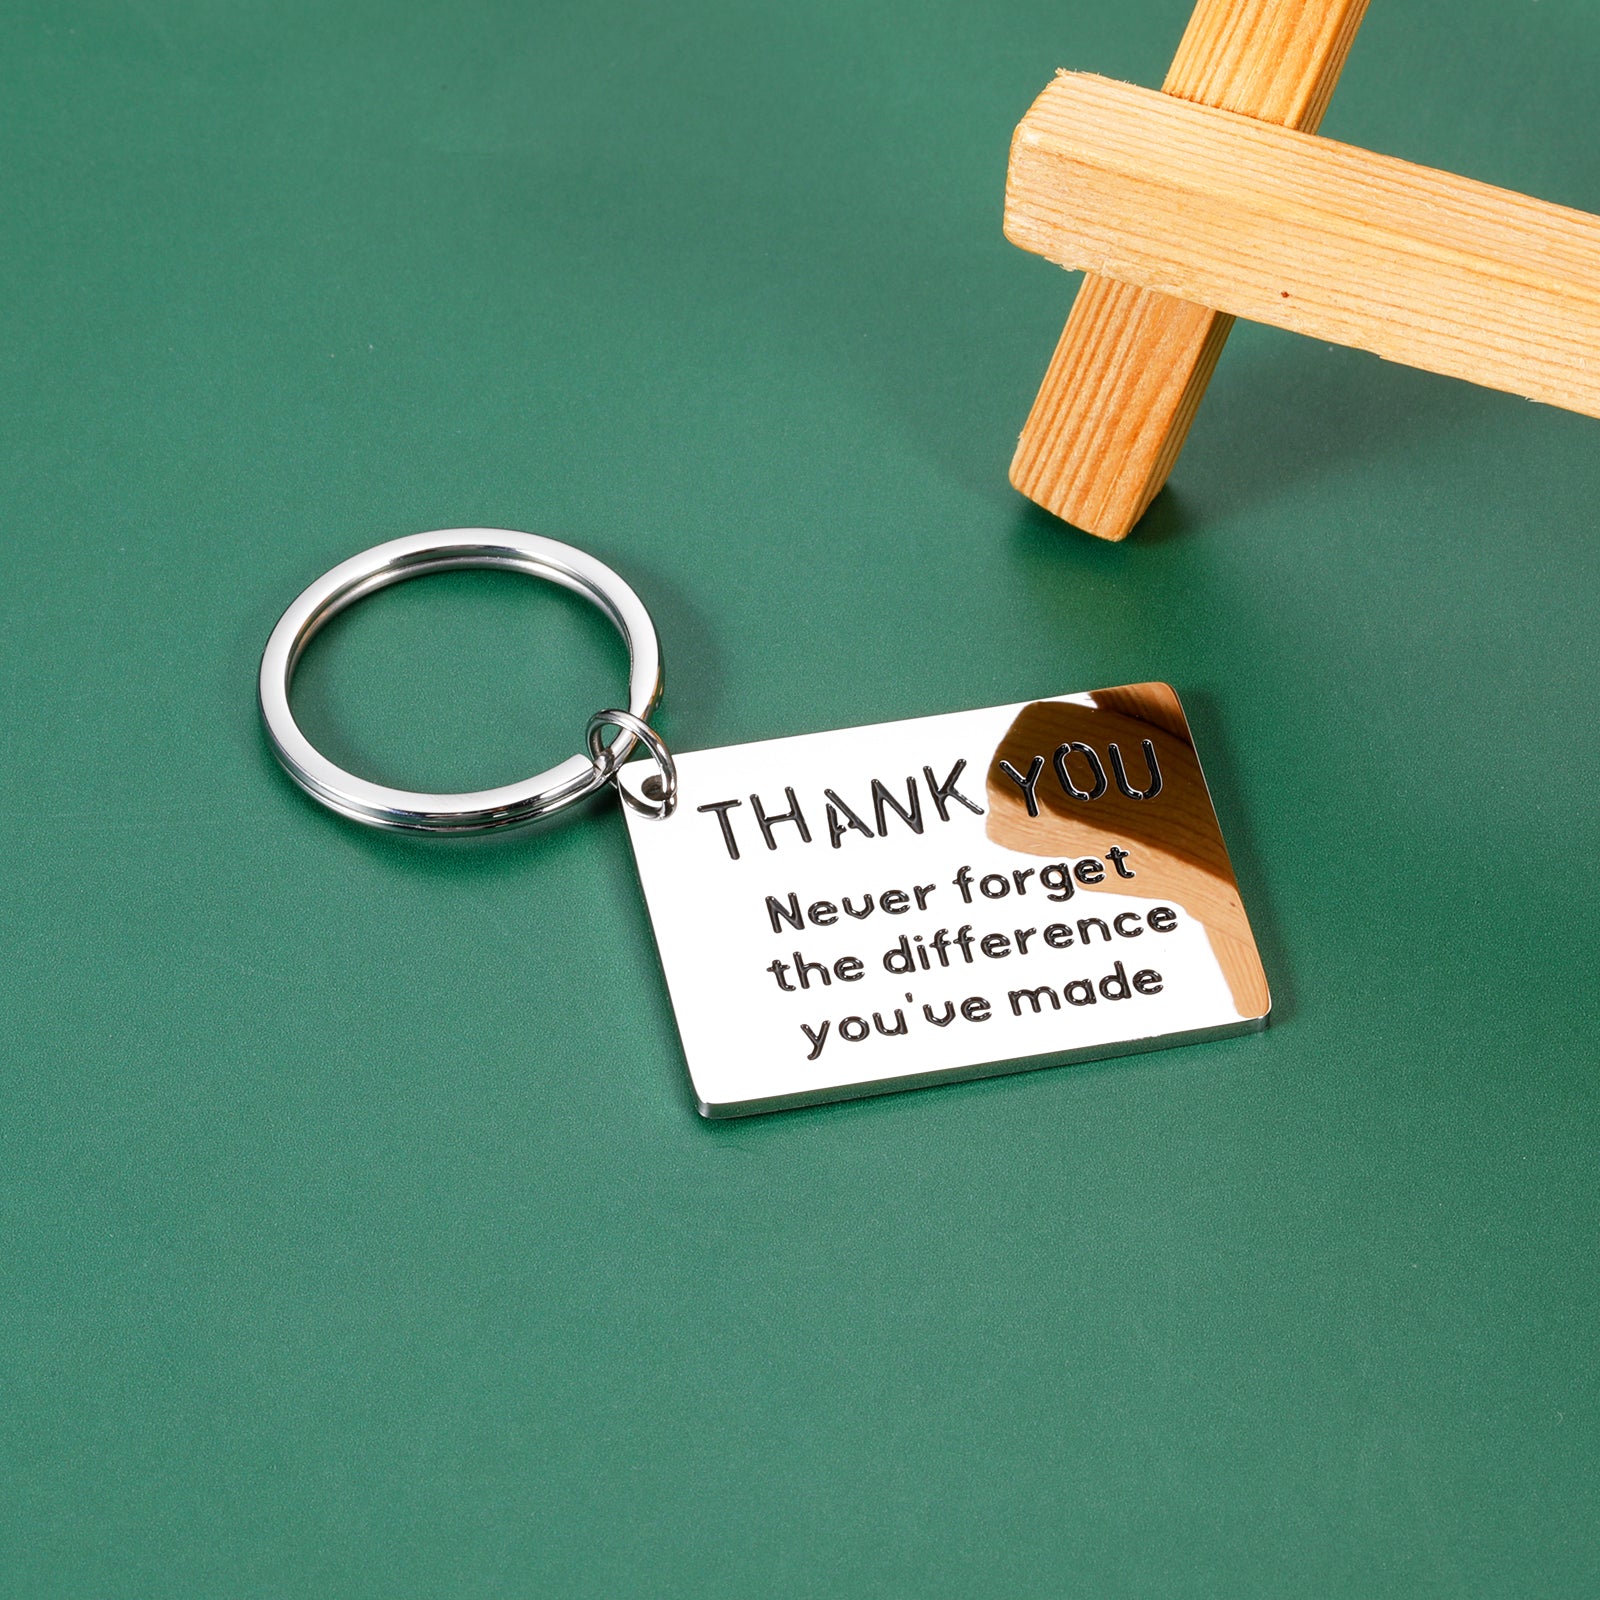 Last Day of Work Gift Idea for Coworkers | Goodbye gifts for coworkers,  Farewell gift for coworker, Work gifts